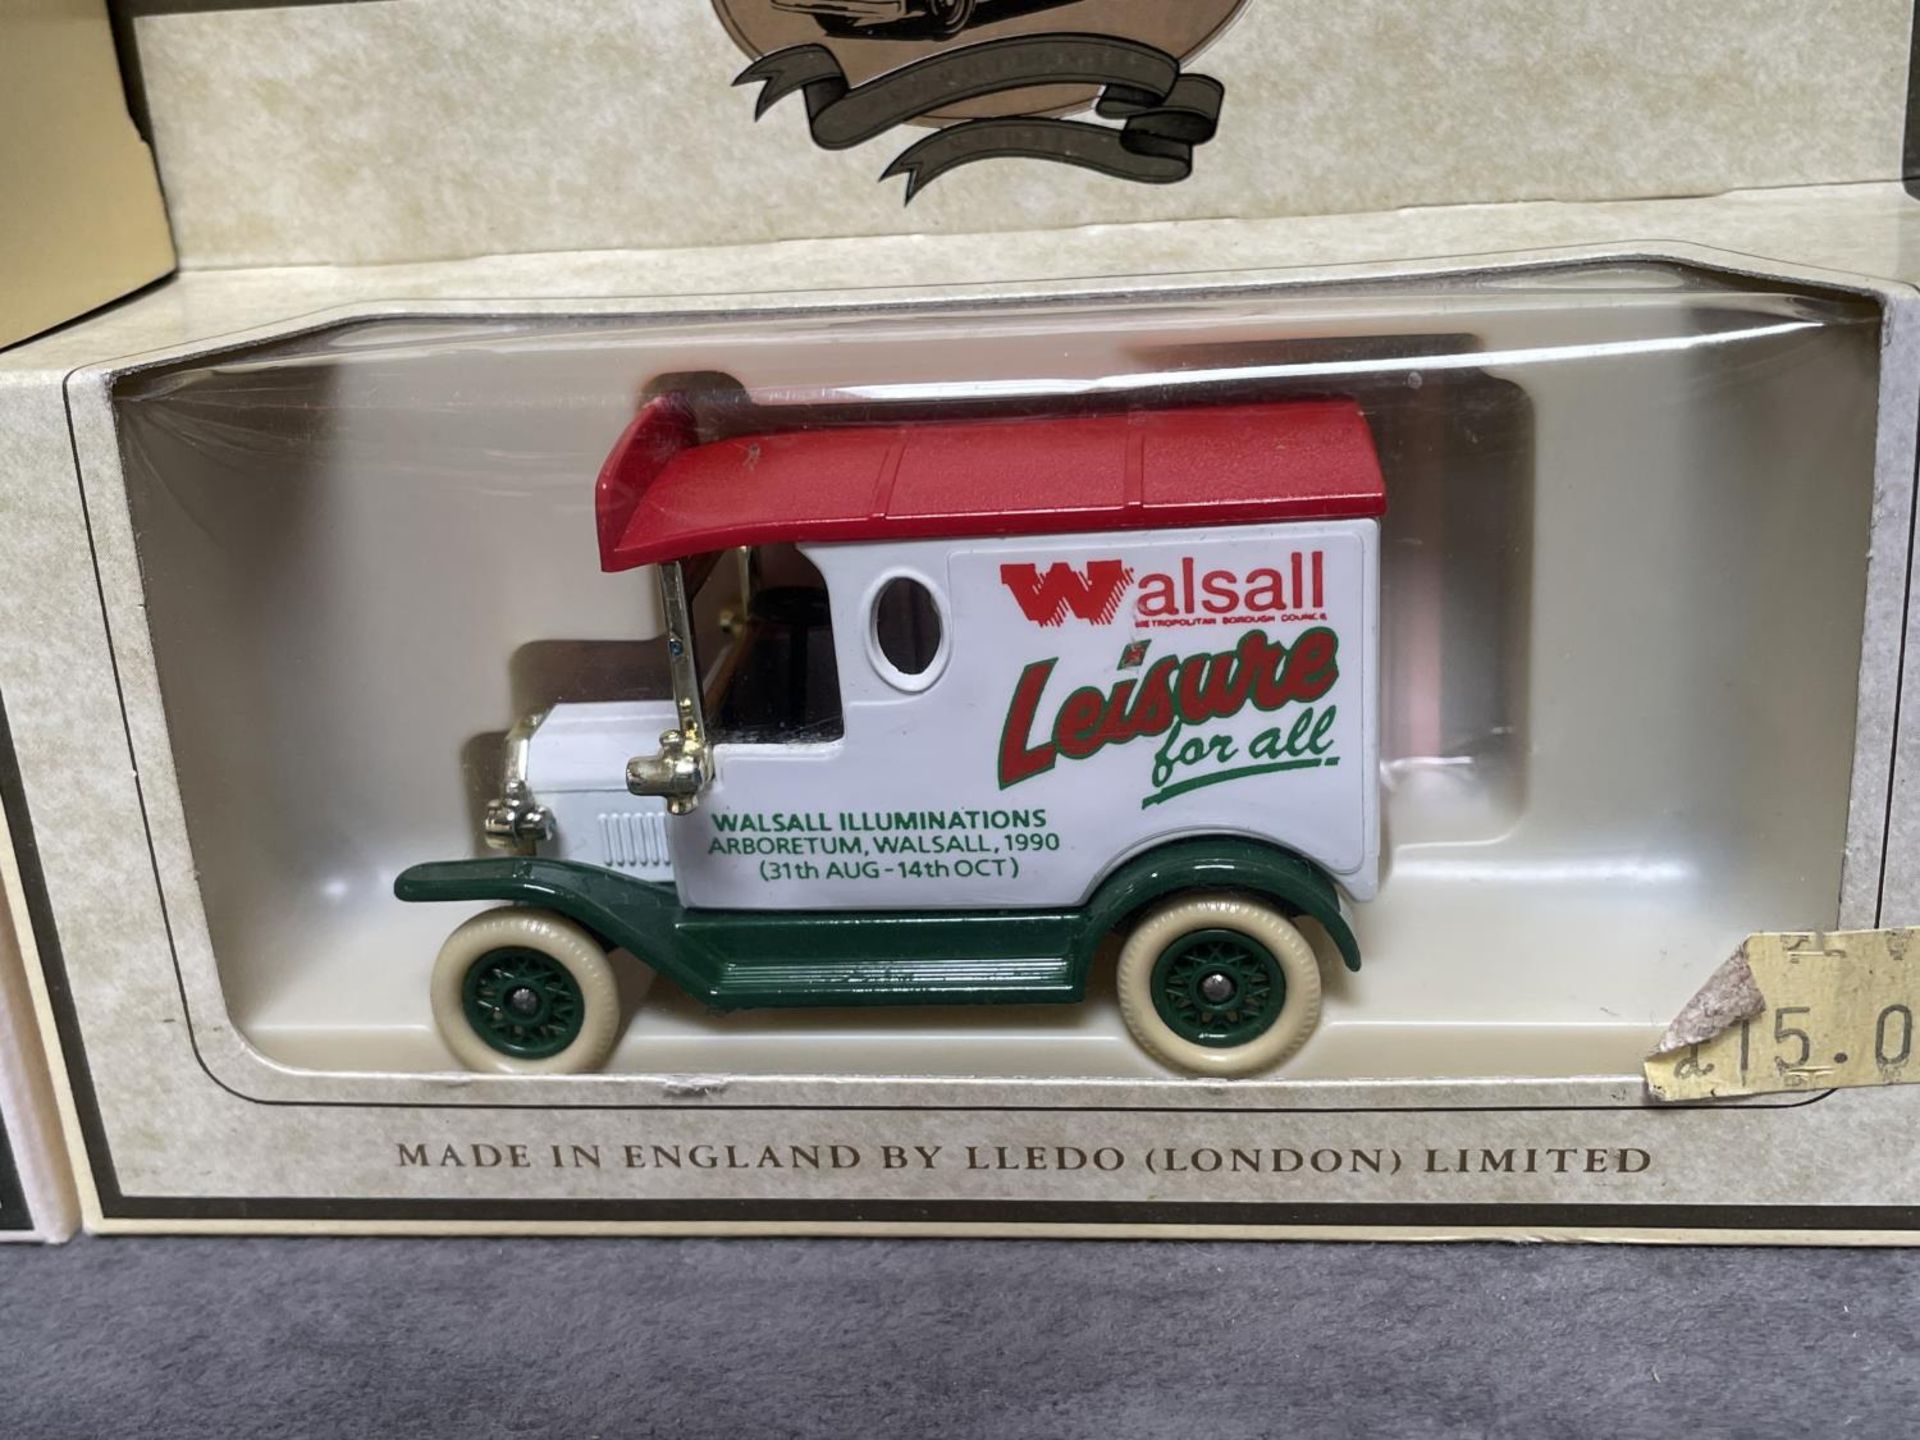 5 x Lledo Diecast Vehicles Individually Boxed Advertising Stoneleigh Toy Extravaganza / Walsall - Image 4 of 4